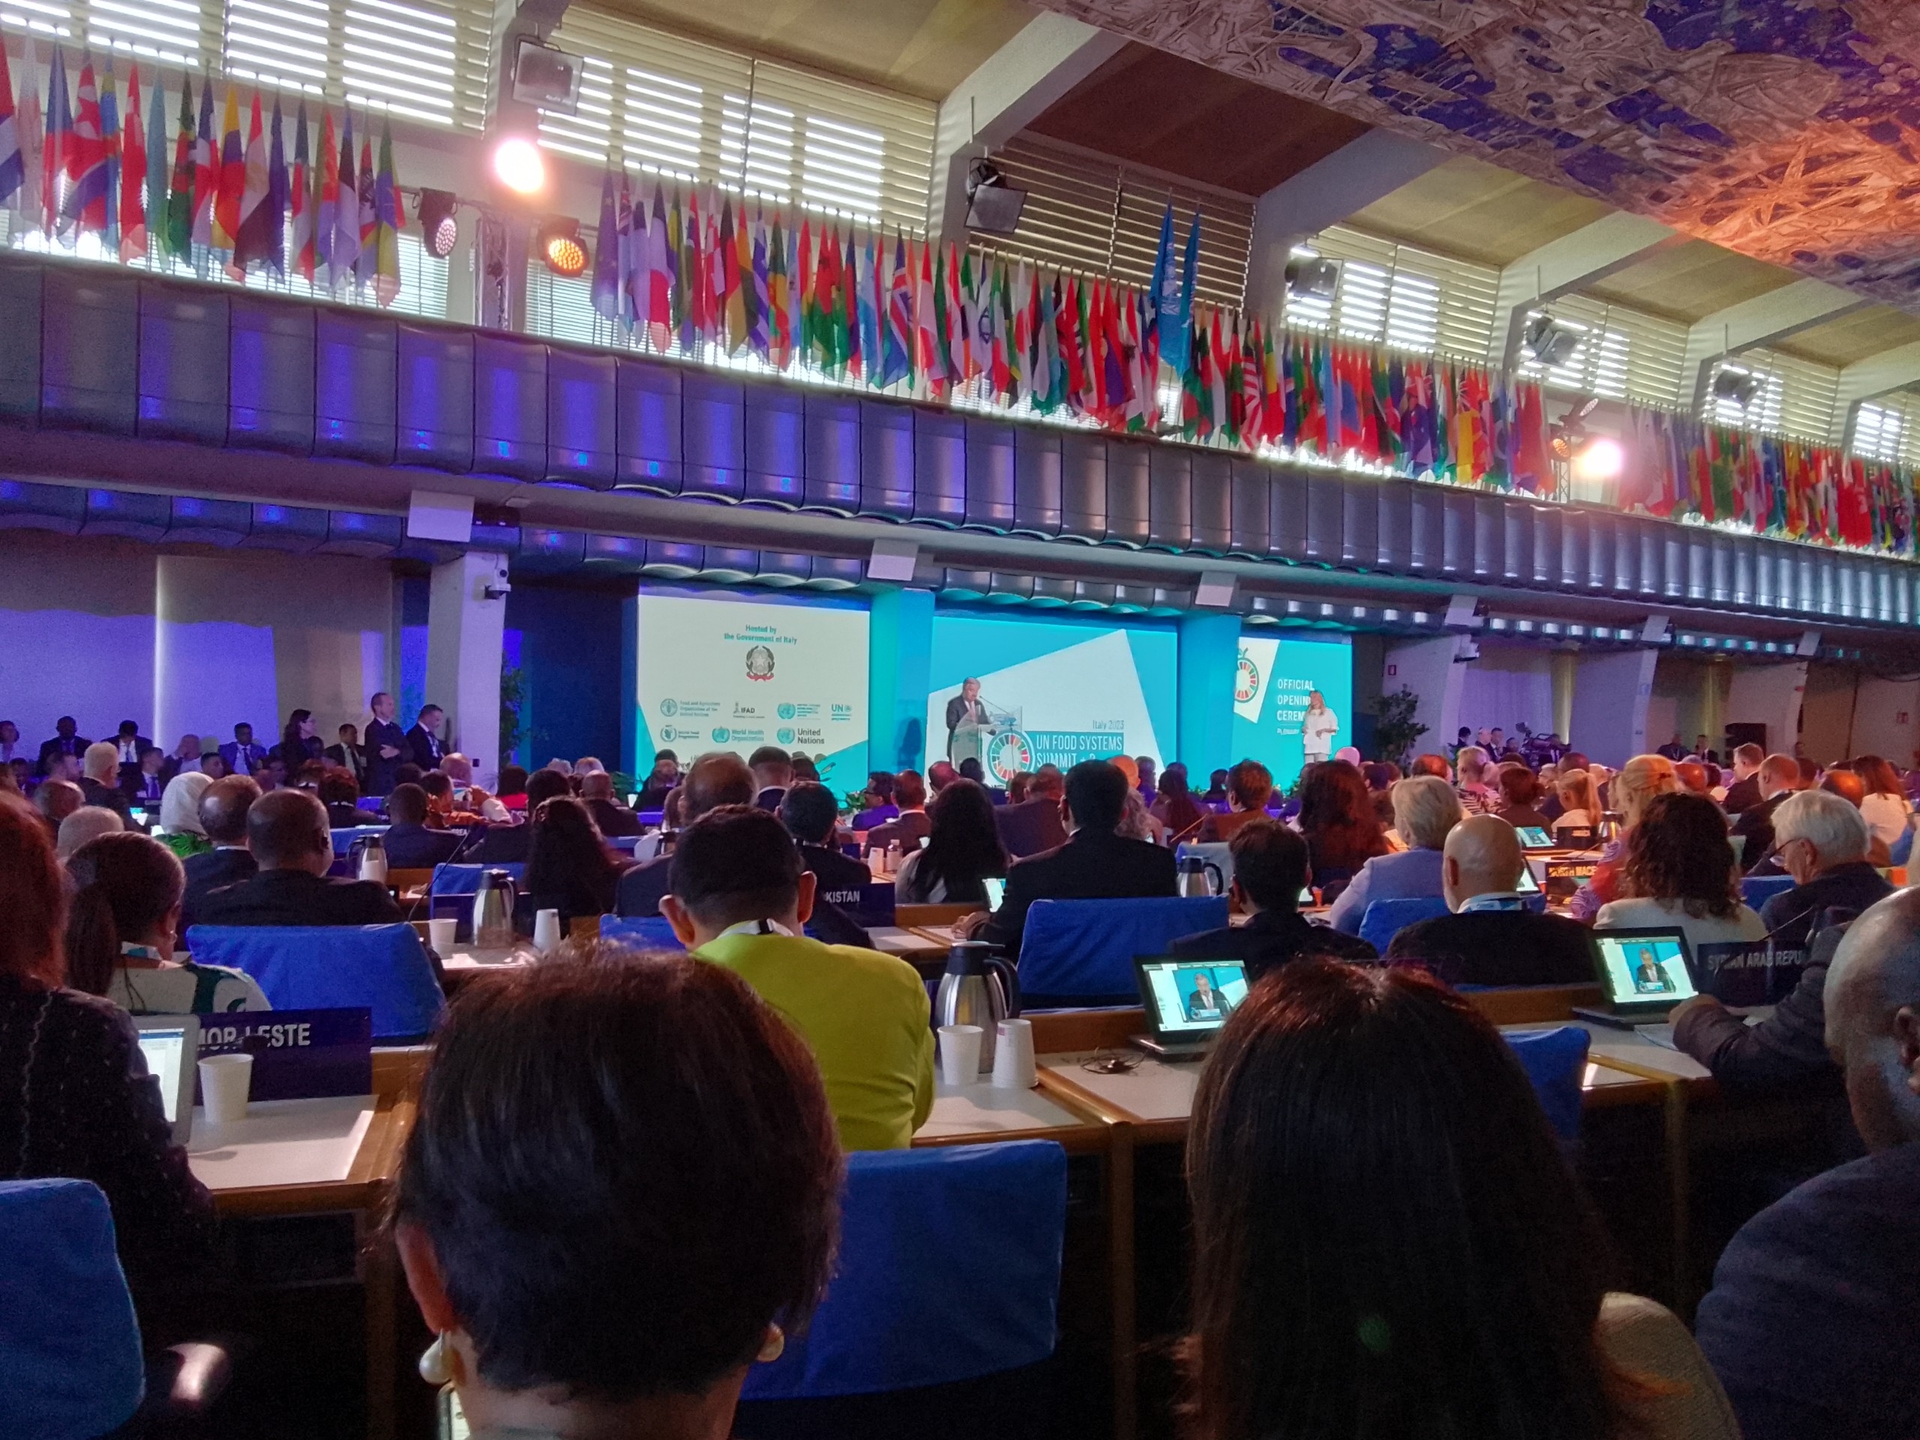 Over 2,000 delegates from 161 countries participated in the conference, including 22 state leaders, more than 100 ministerial leaders, and 150 international organizations.